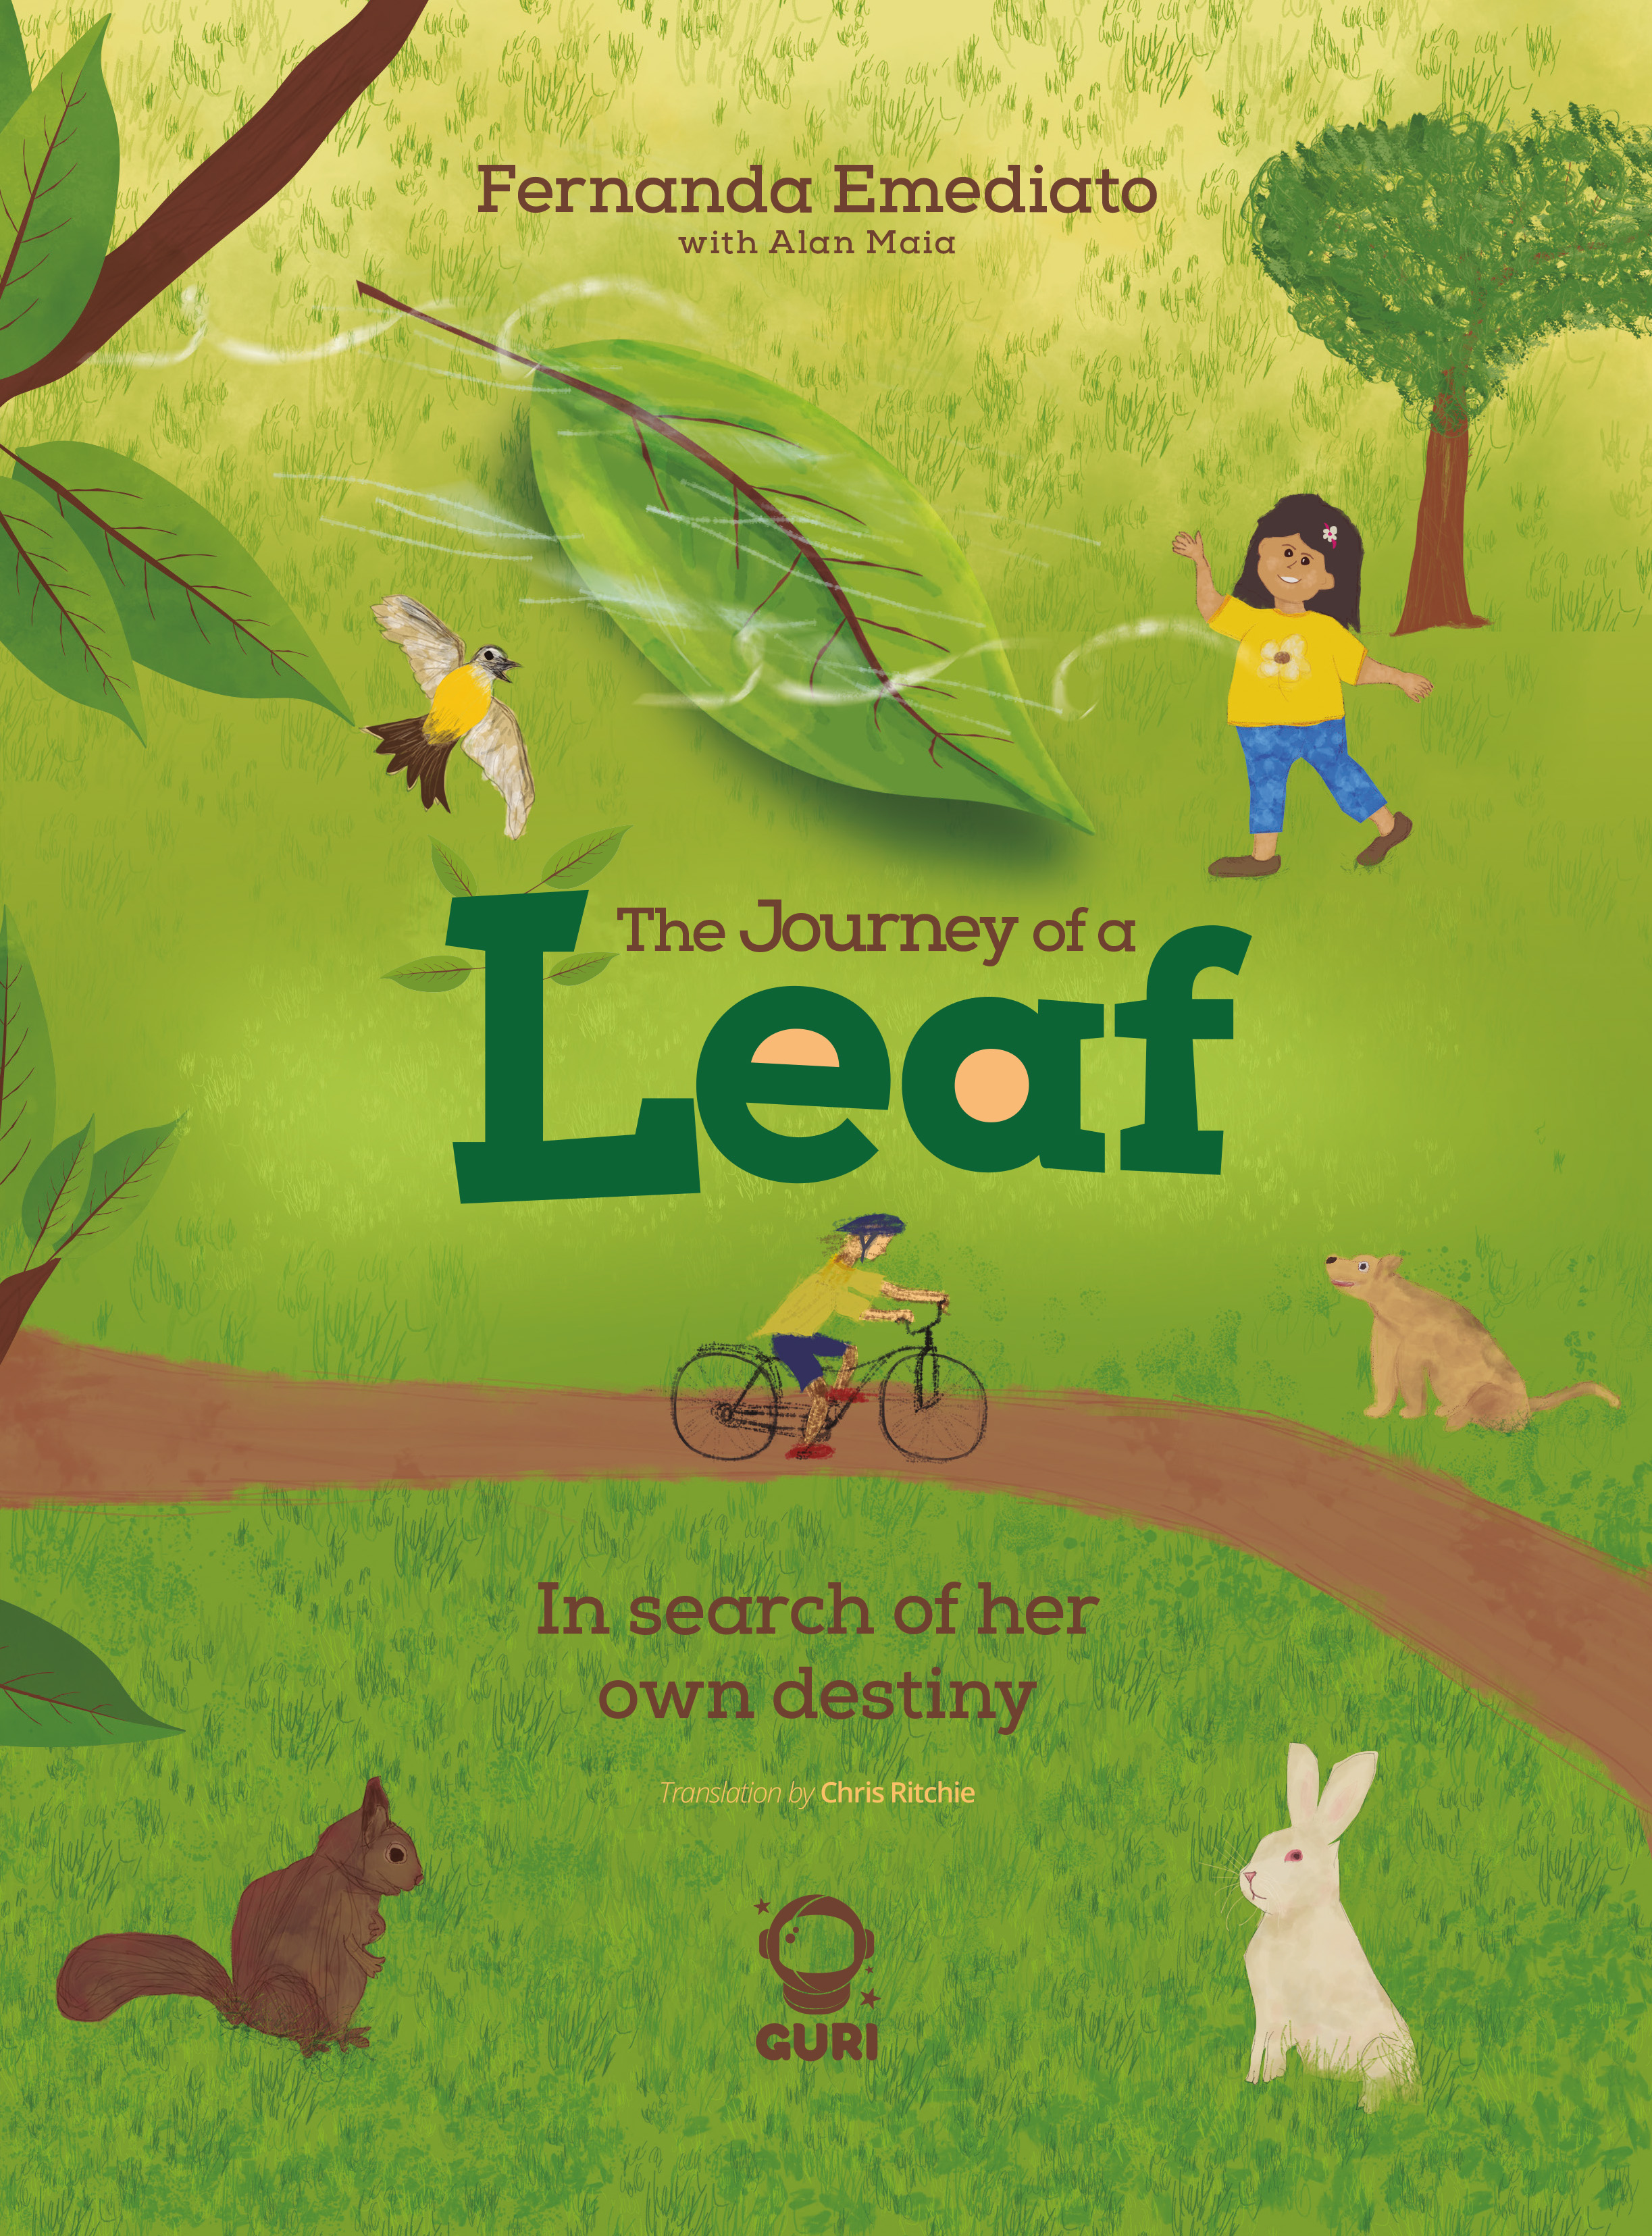 The journey of a leaf - Accessible edition with image descriptions